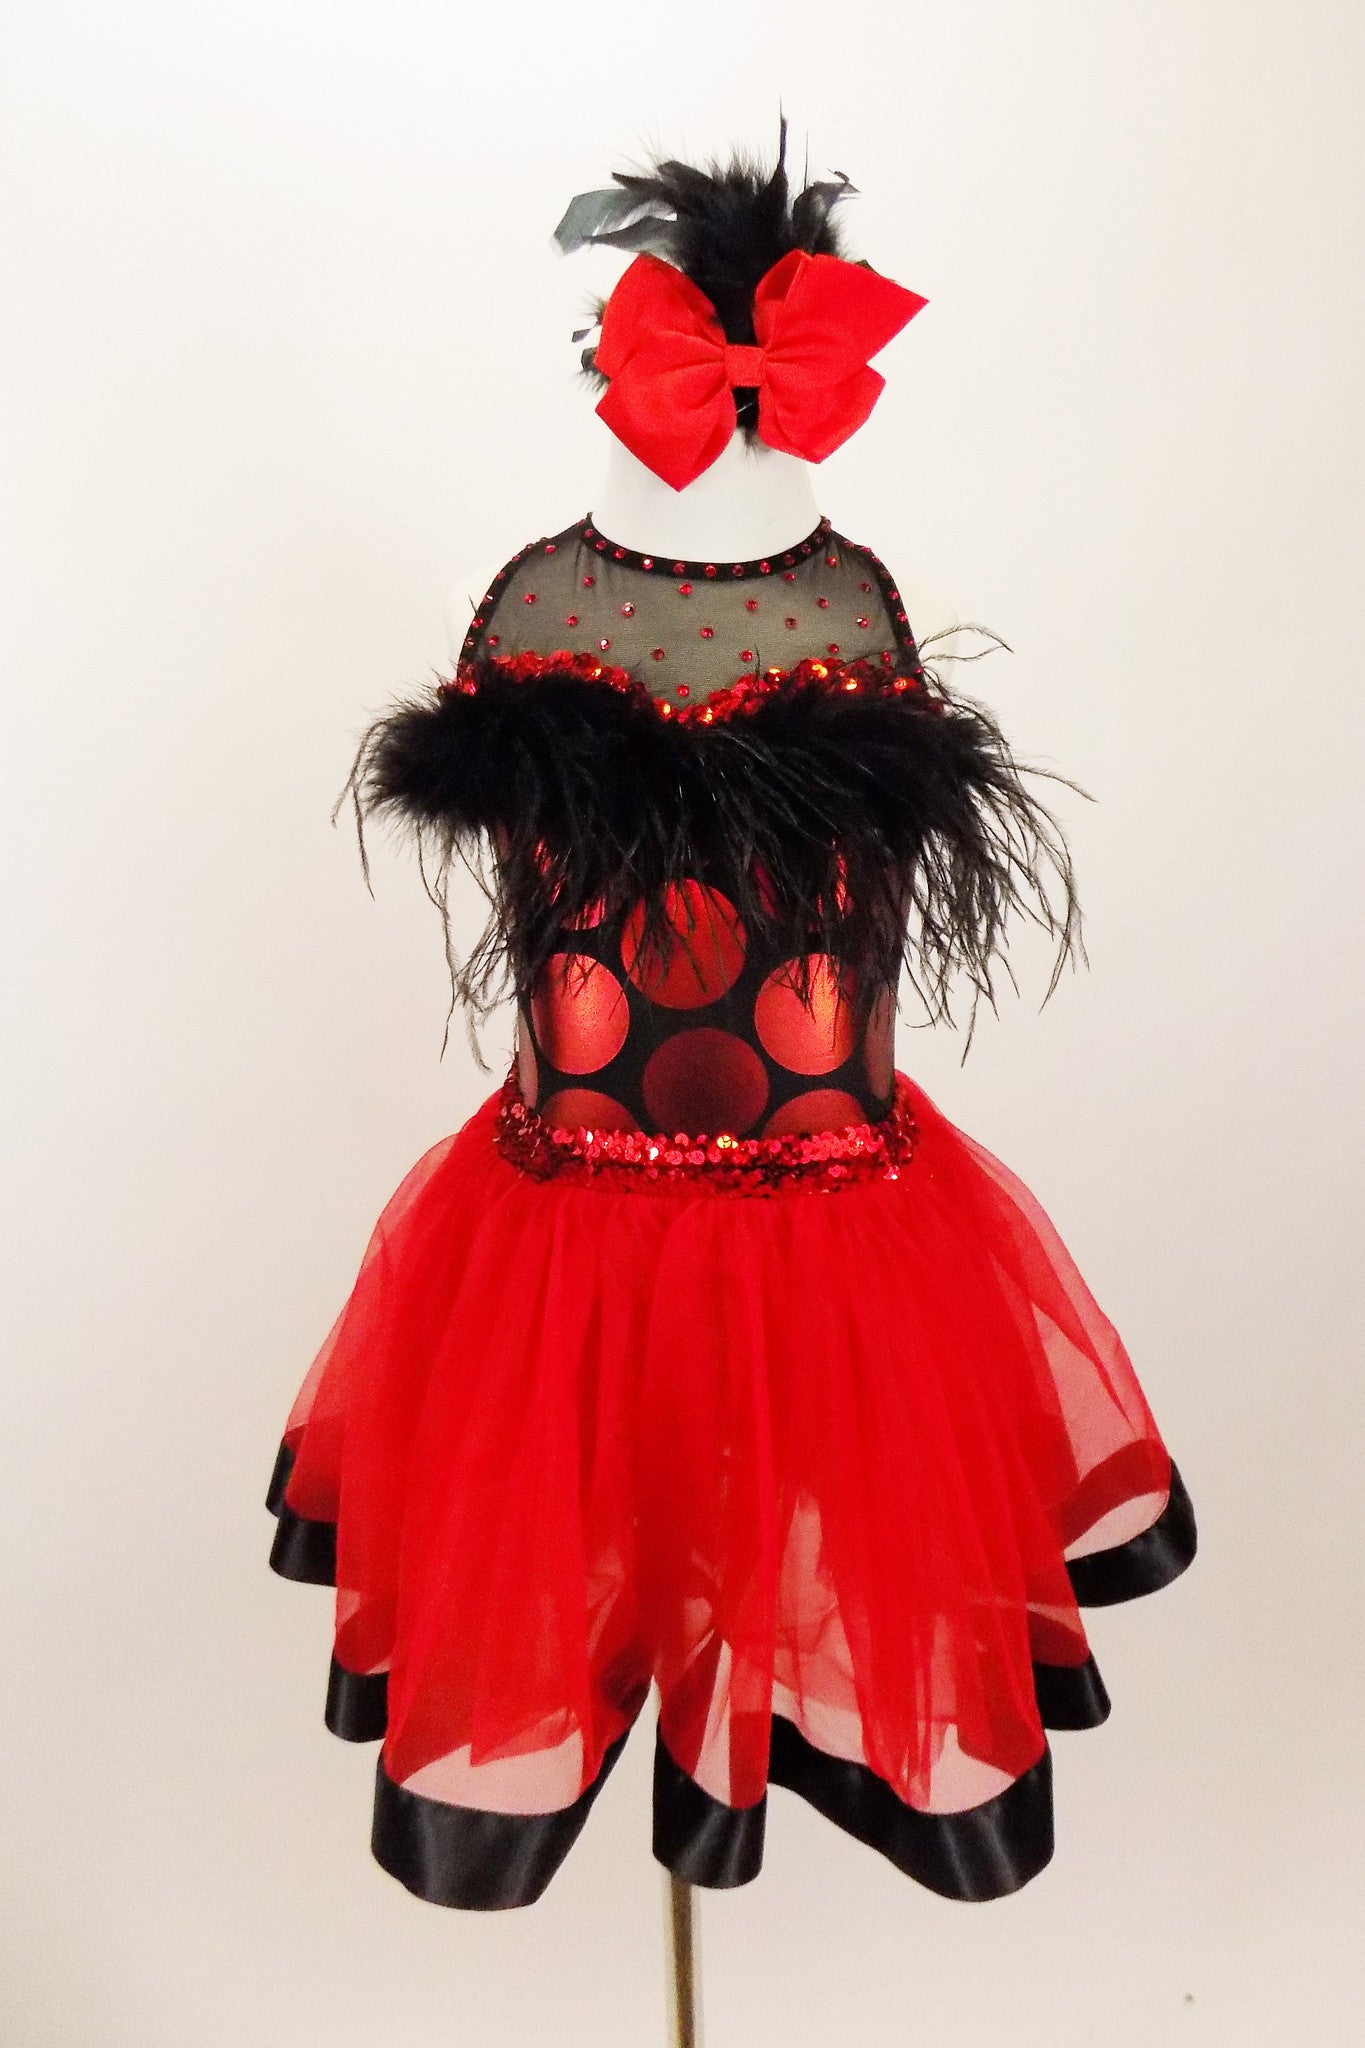 Dress has bodice with sweetheart neck polka dots & black mesh covered with crystals & feather trim. Skirt is red tricot with black satin hem. Has hair accessory. Front